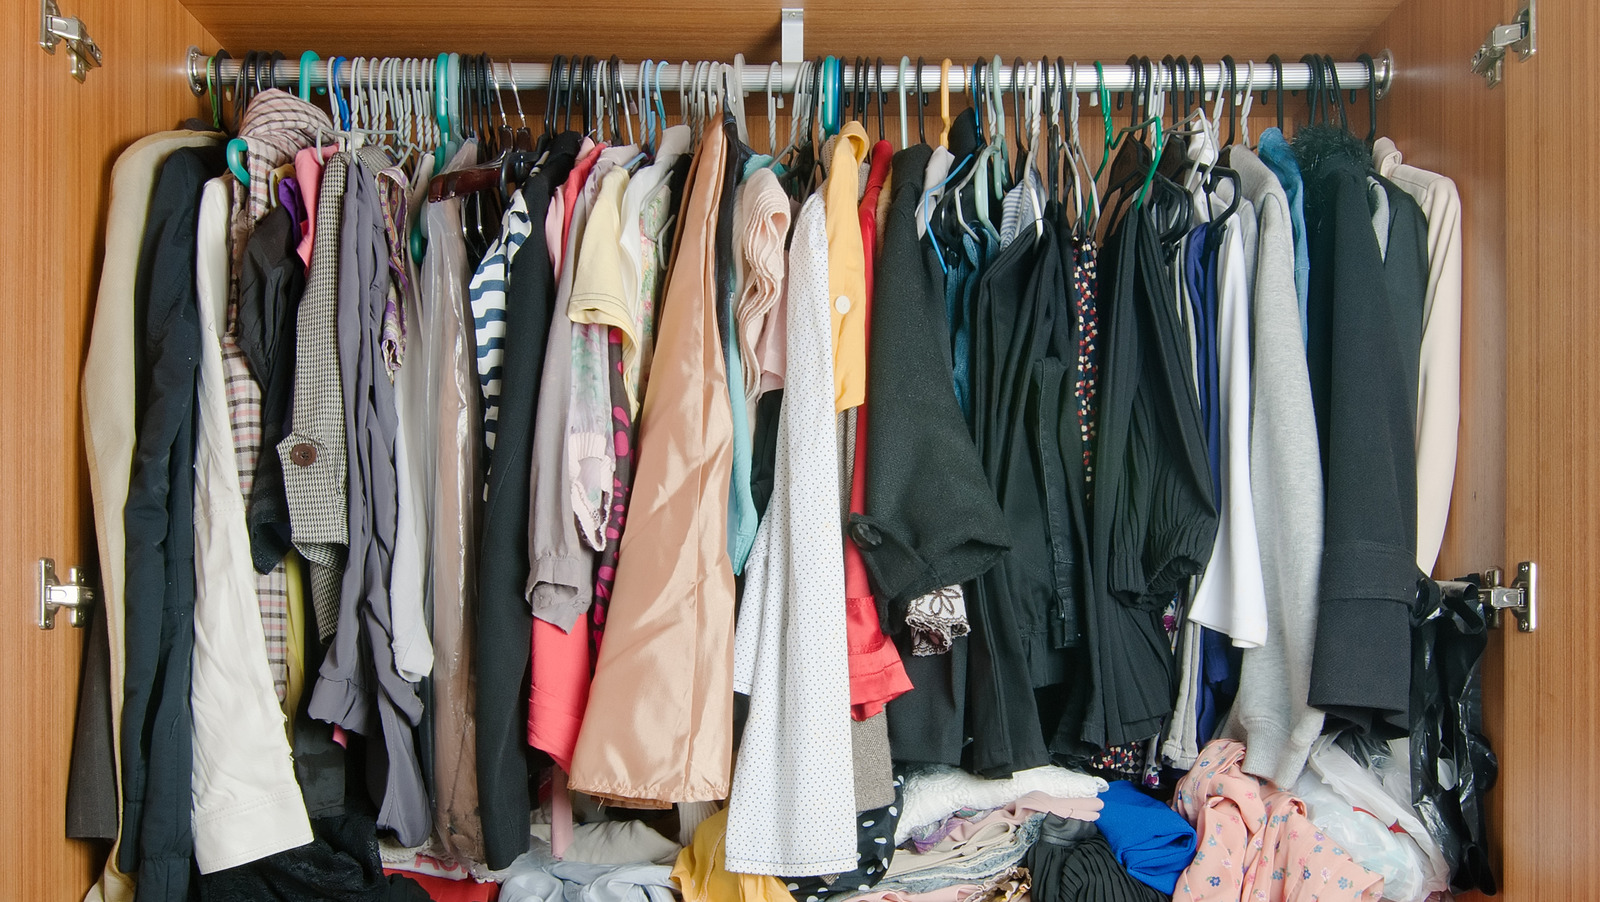 https://www.housedigest.com/img/gallery/the-best-way-to-hang-and-store-long-dresses-for-a-clutter-free-closet/l-intro-1695391452.jpg